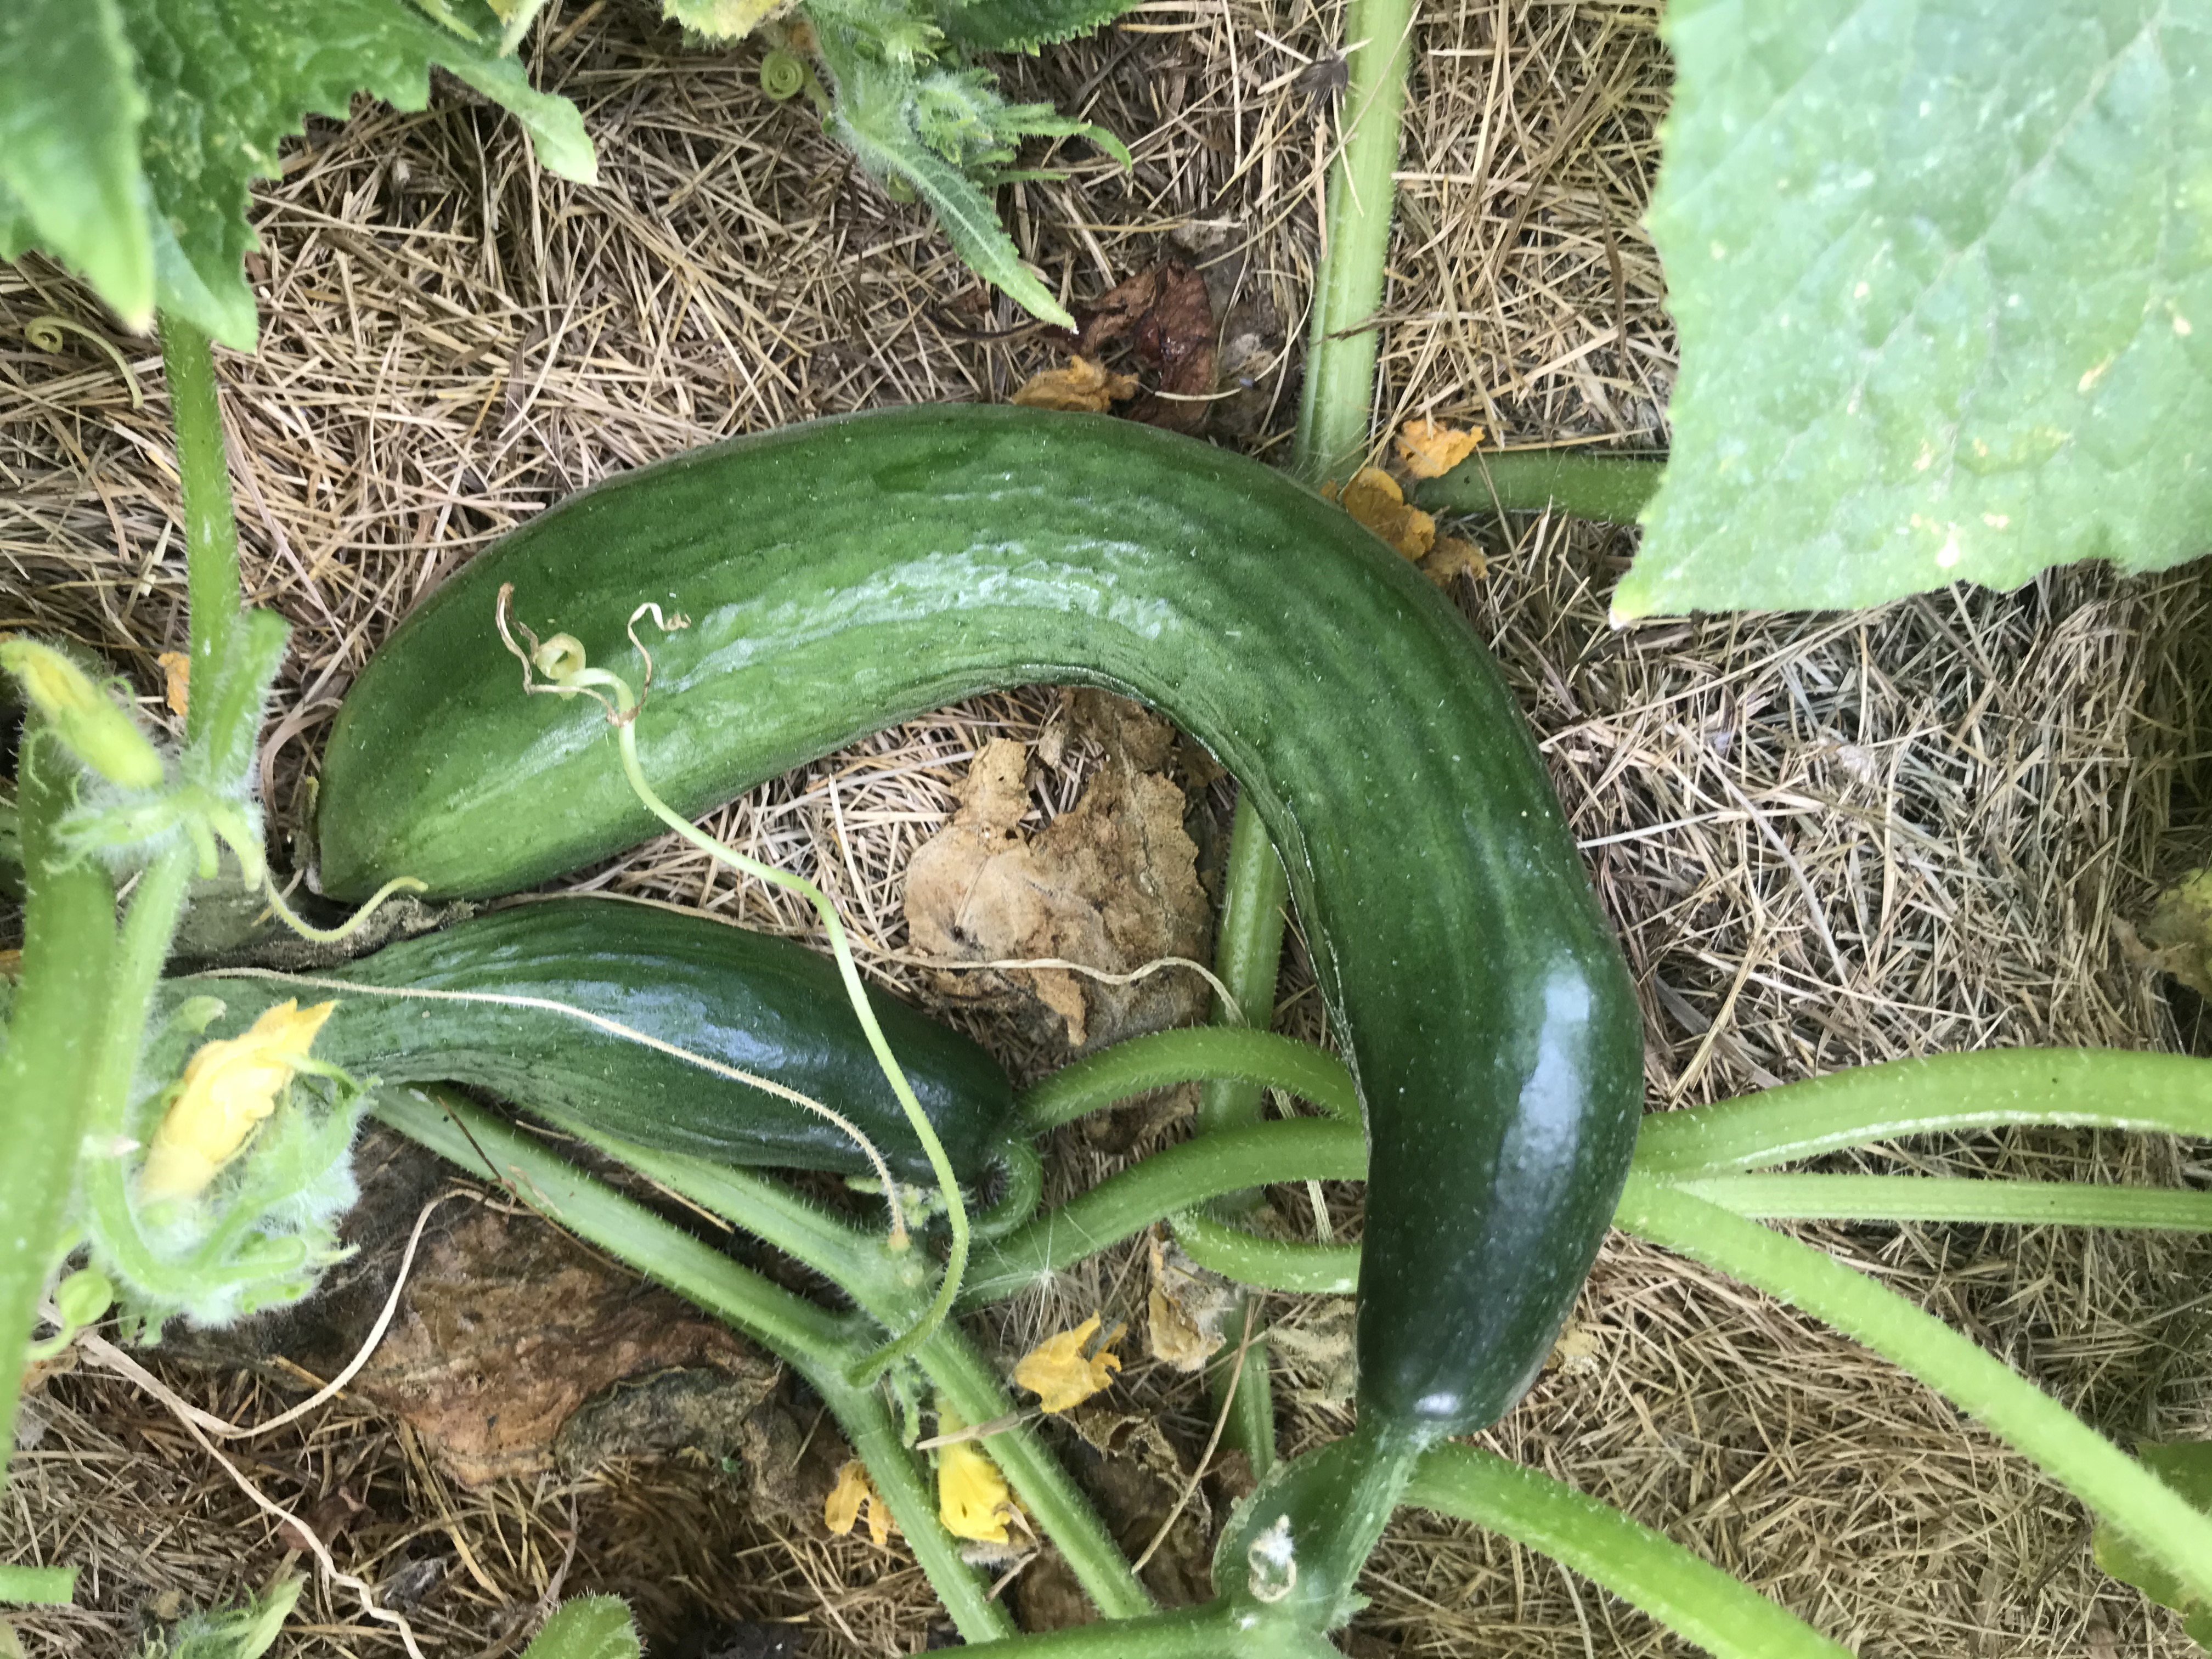 Bulbous cucumber. Image courtesy of Daryl Kratchmer.